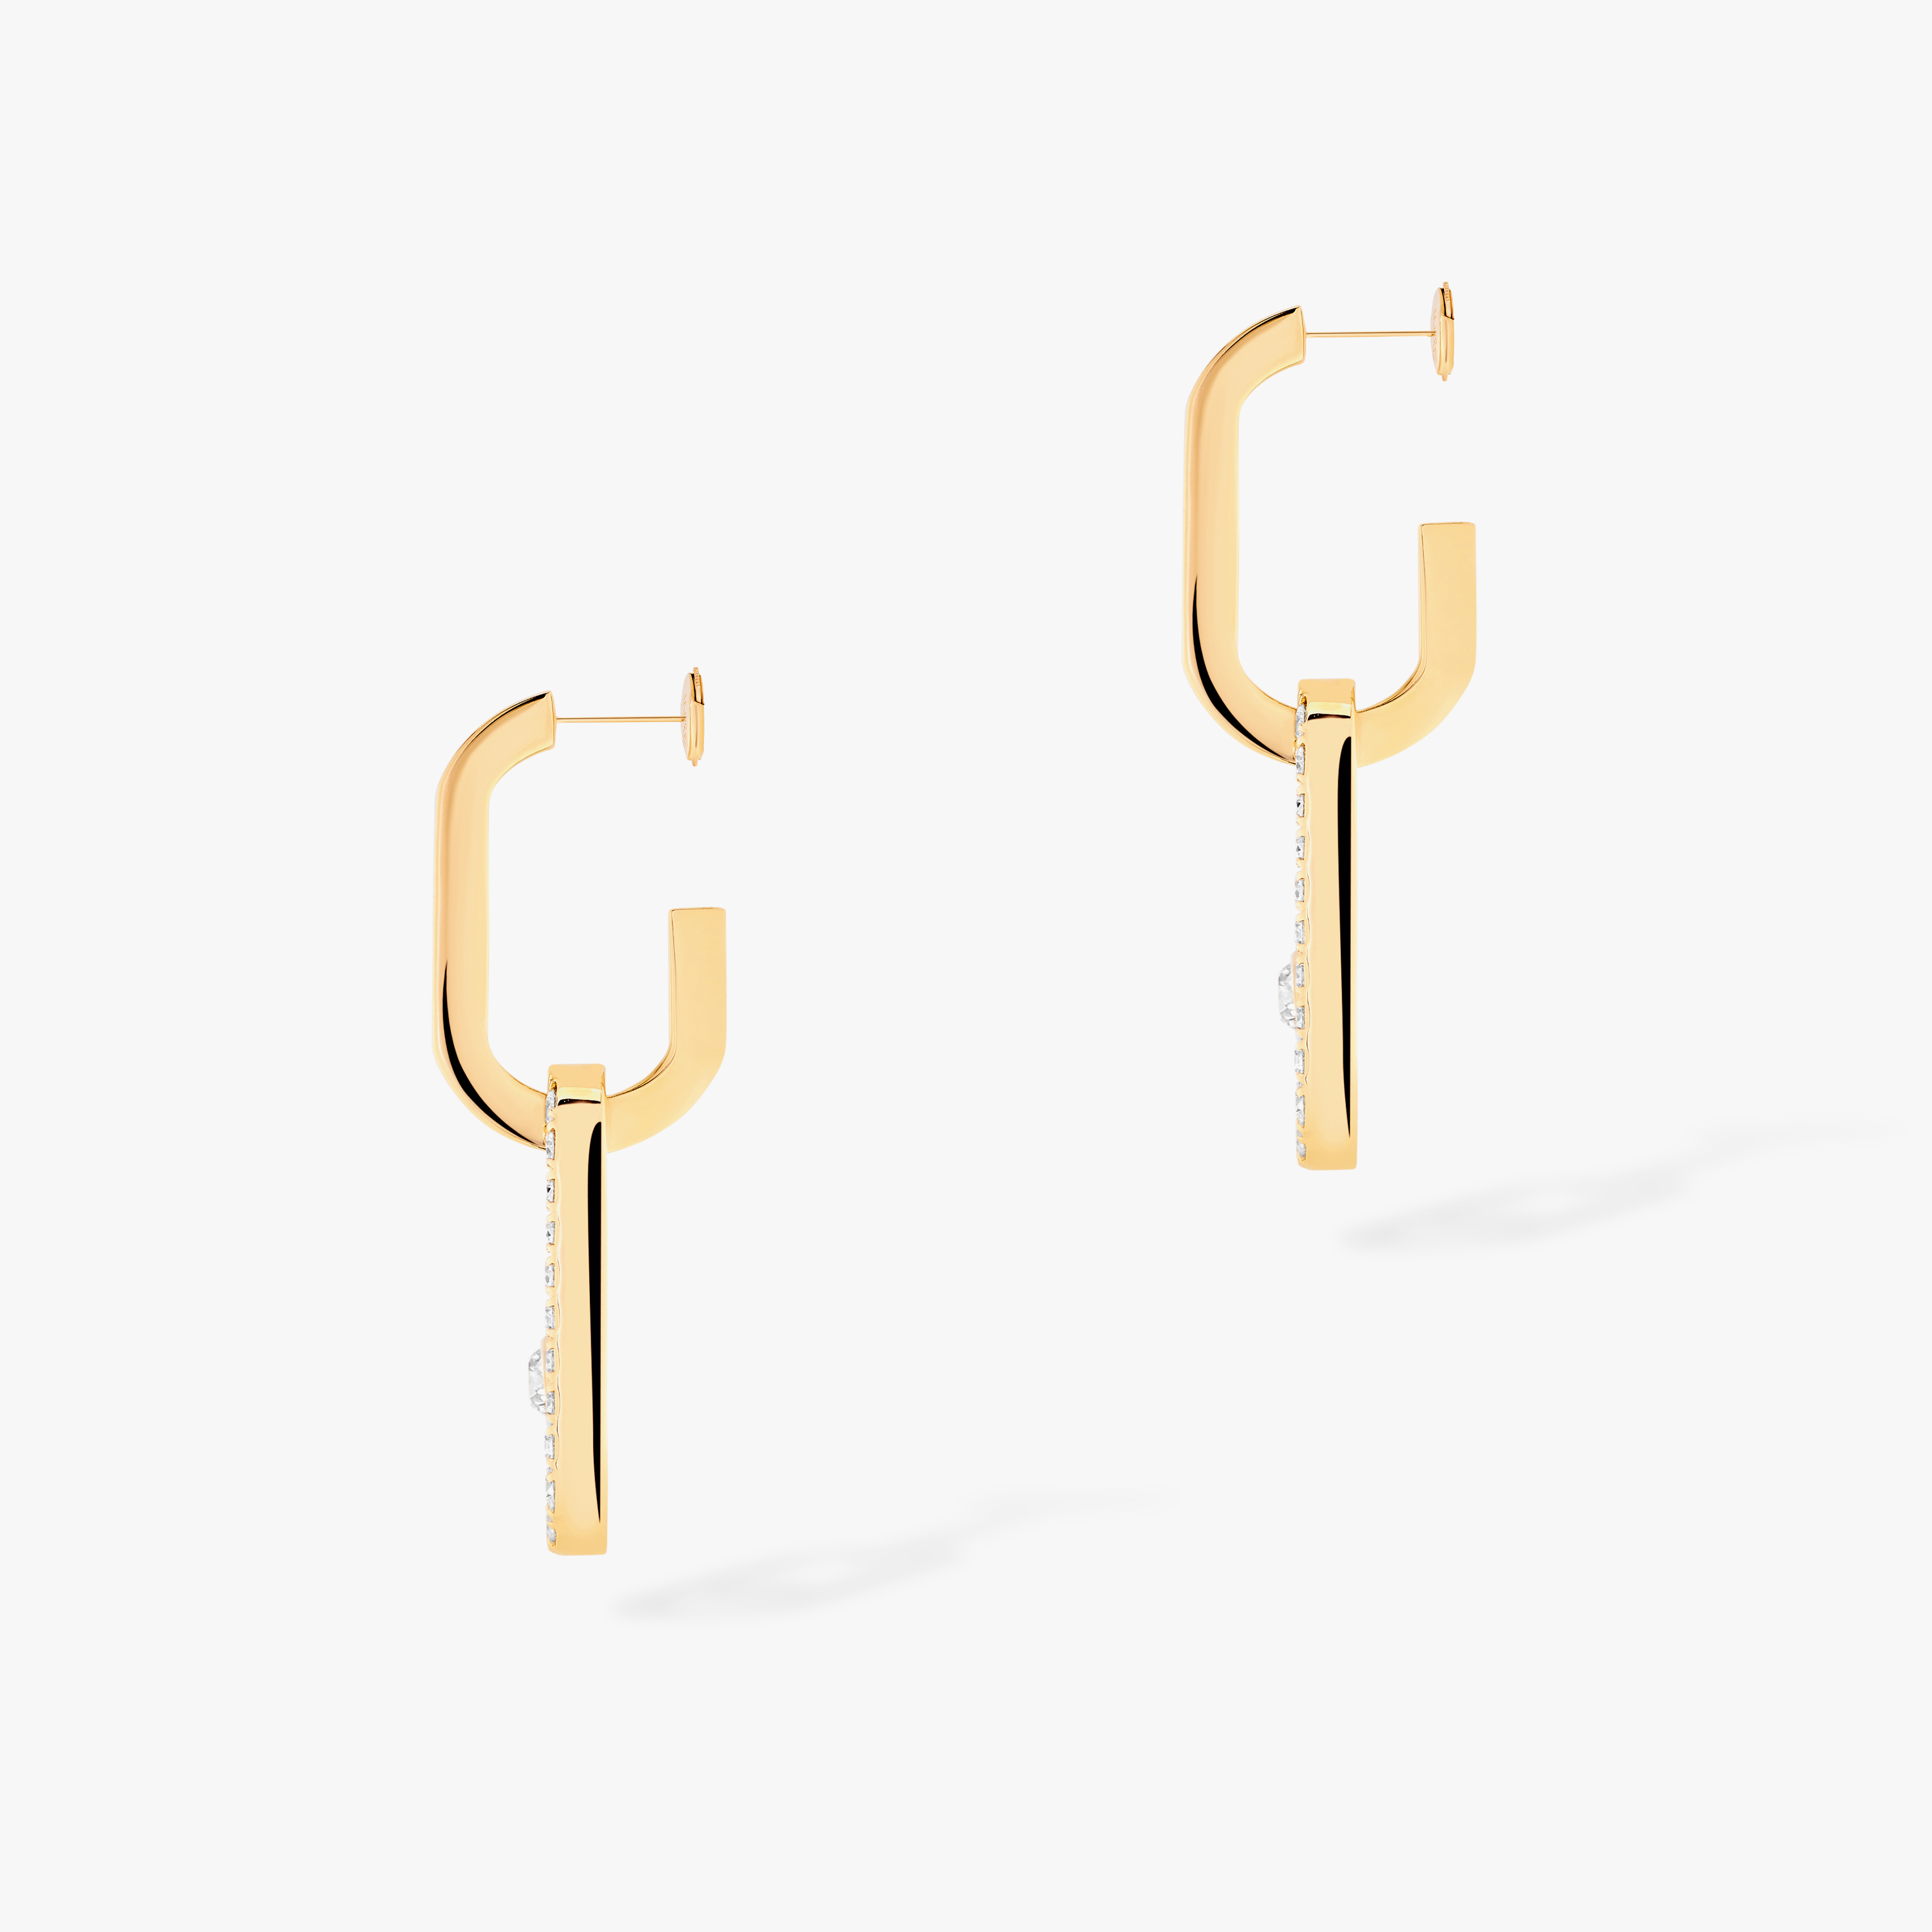 Earrings For Her Yellow Gold Diamond Move Link 12469-YG